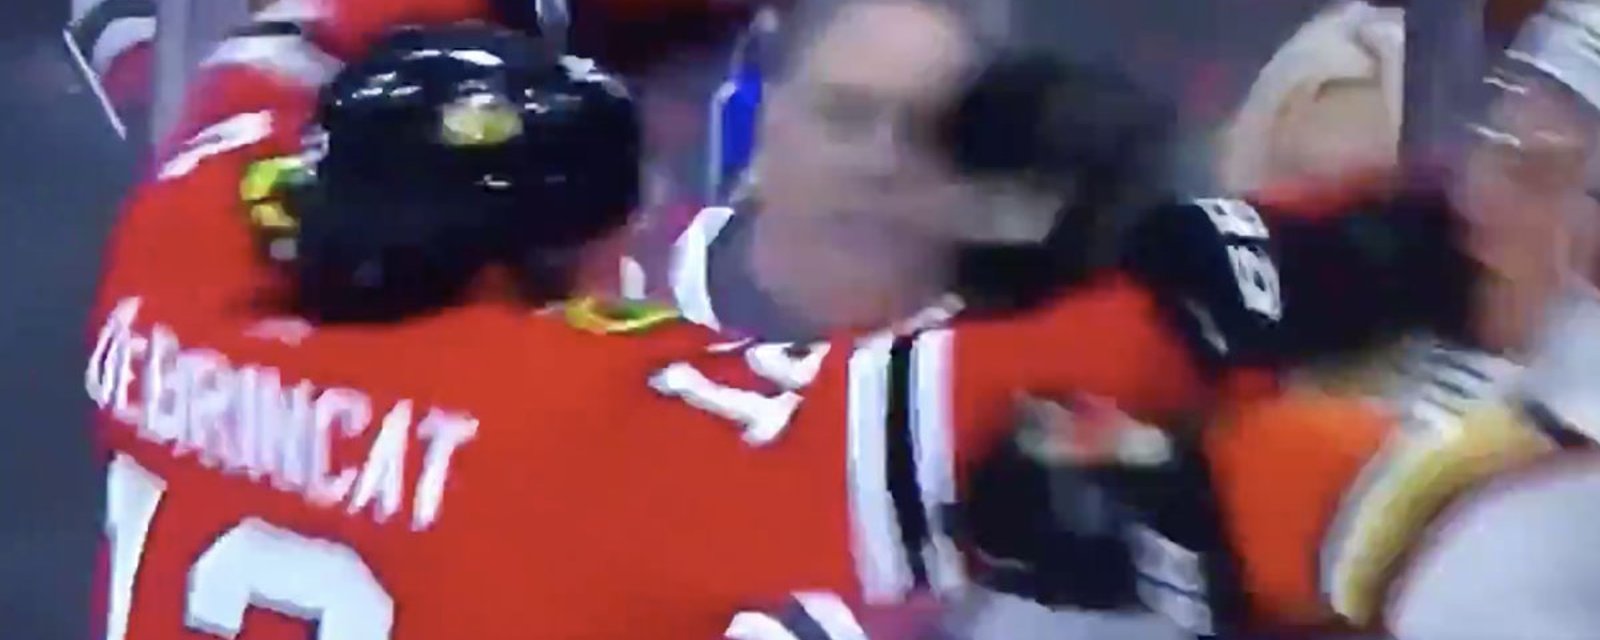 DeBrincat fears nothing and drops the gloves to fight Manson! 